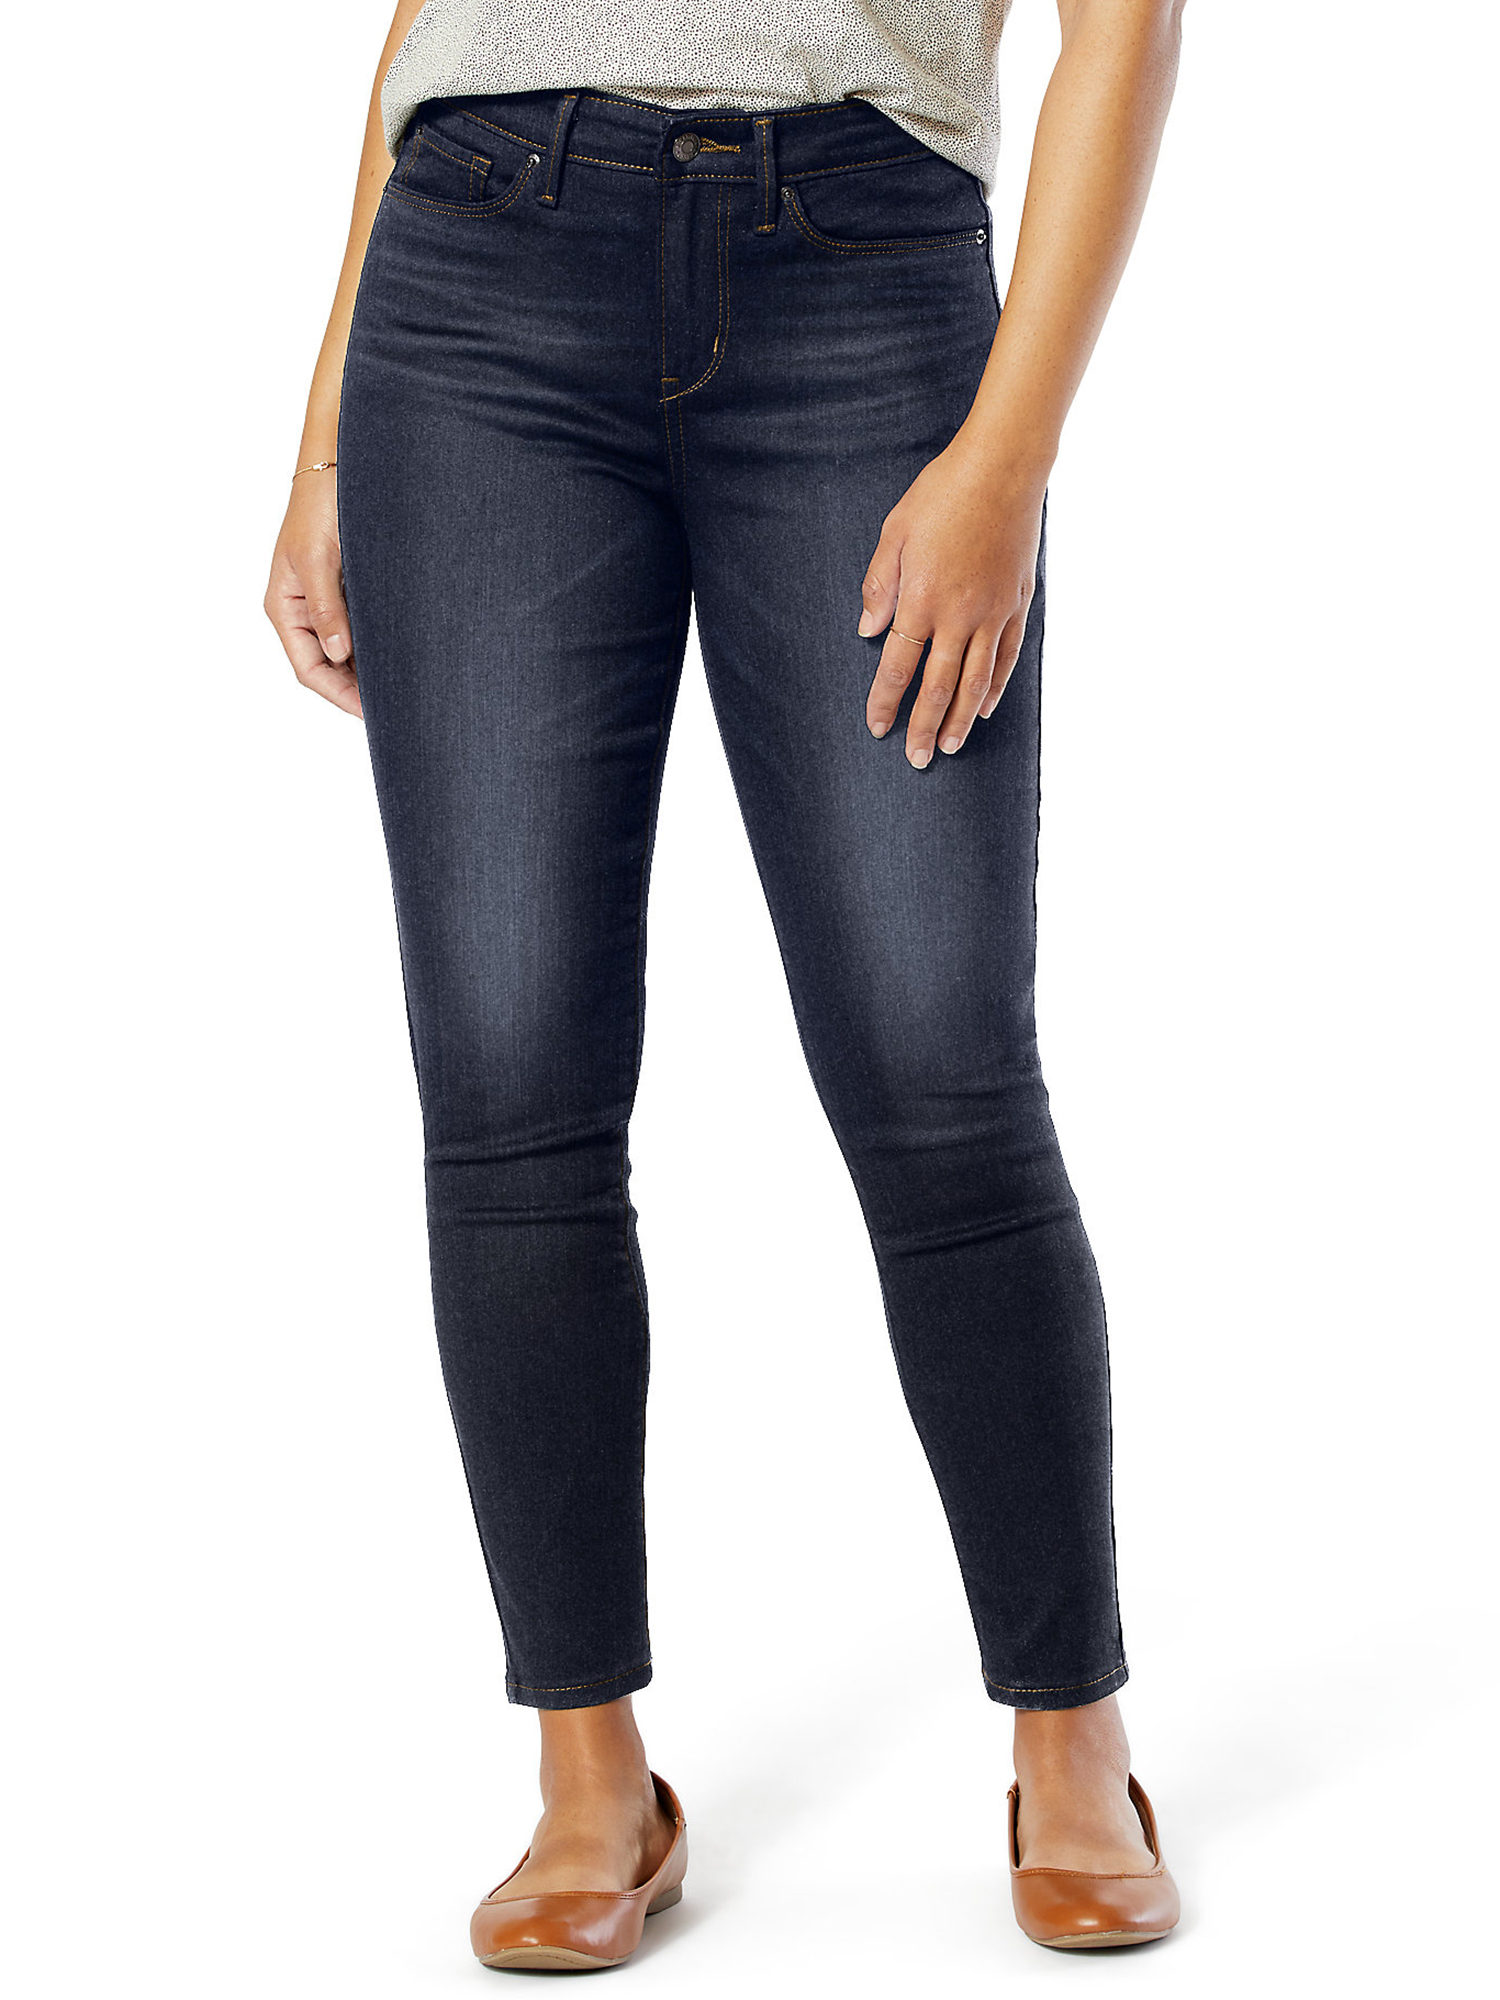 Signature by Levi Strauss & Co. Women's and Women's Plus Mid Rise Skinny Jeans - image 1 of 5